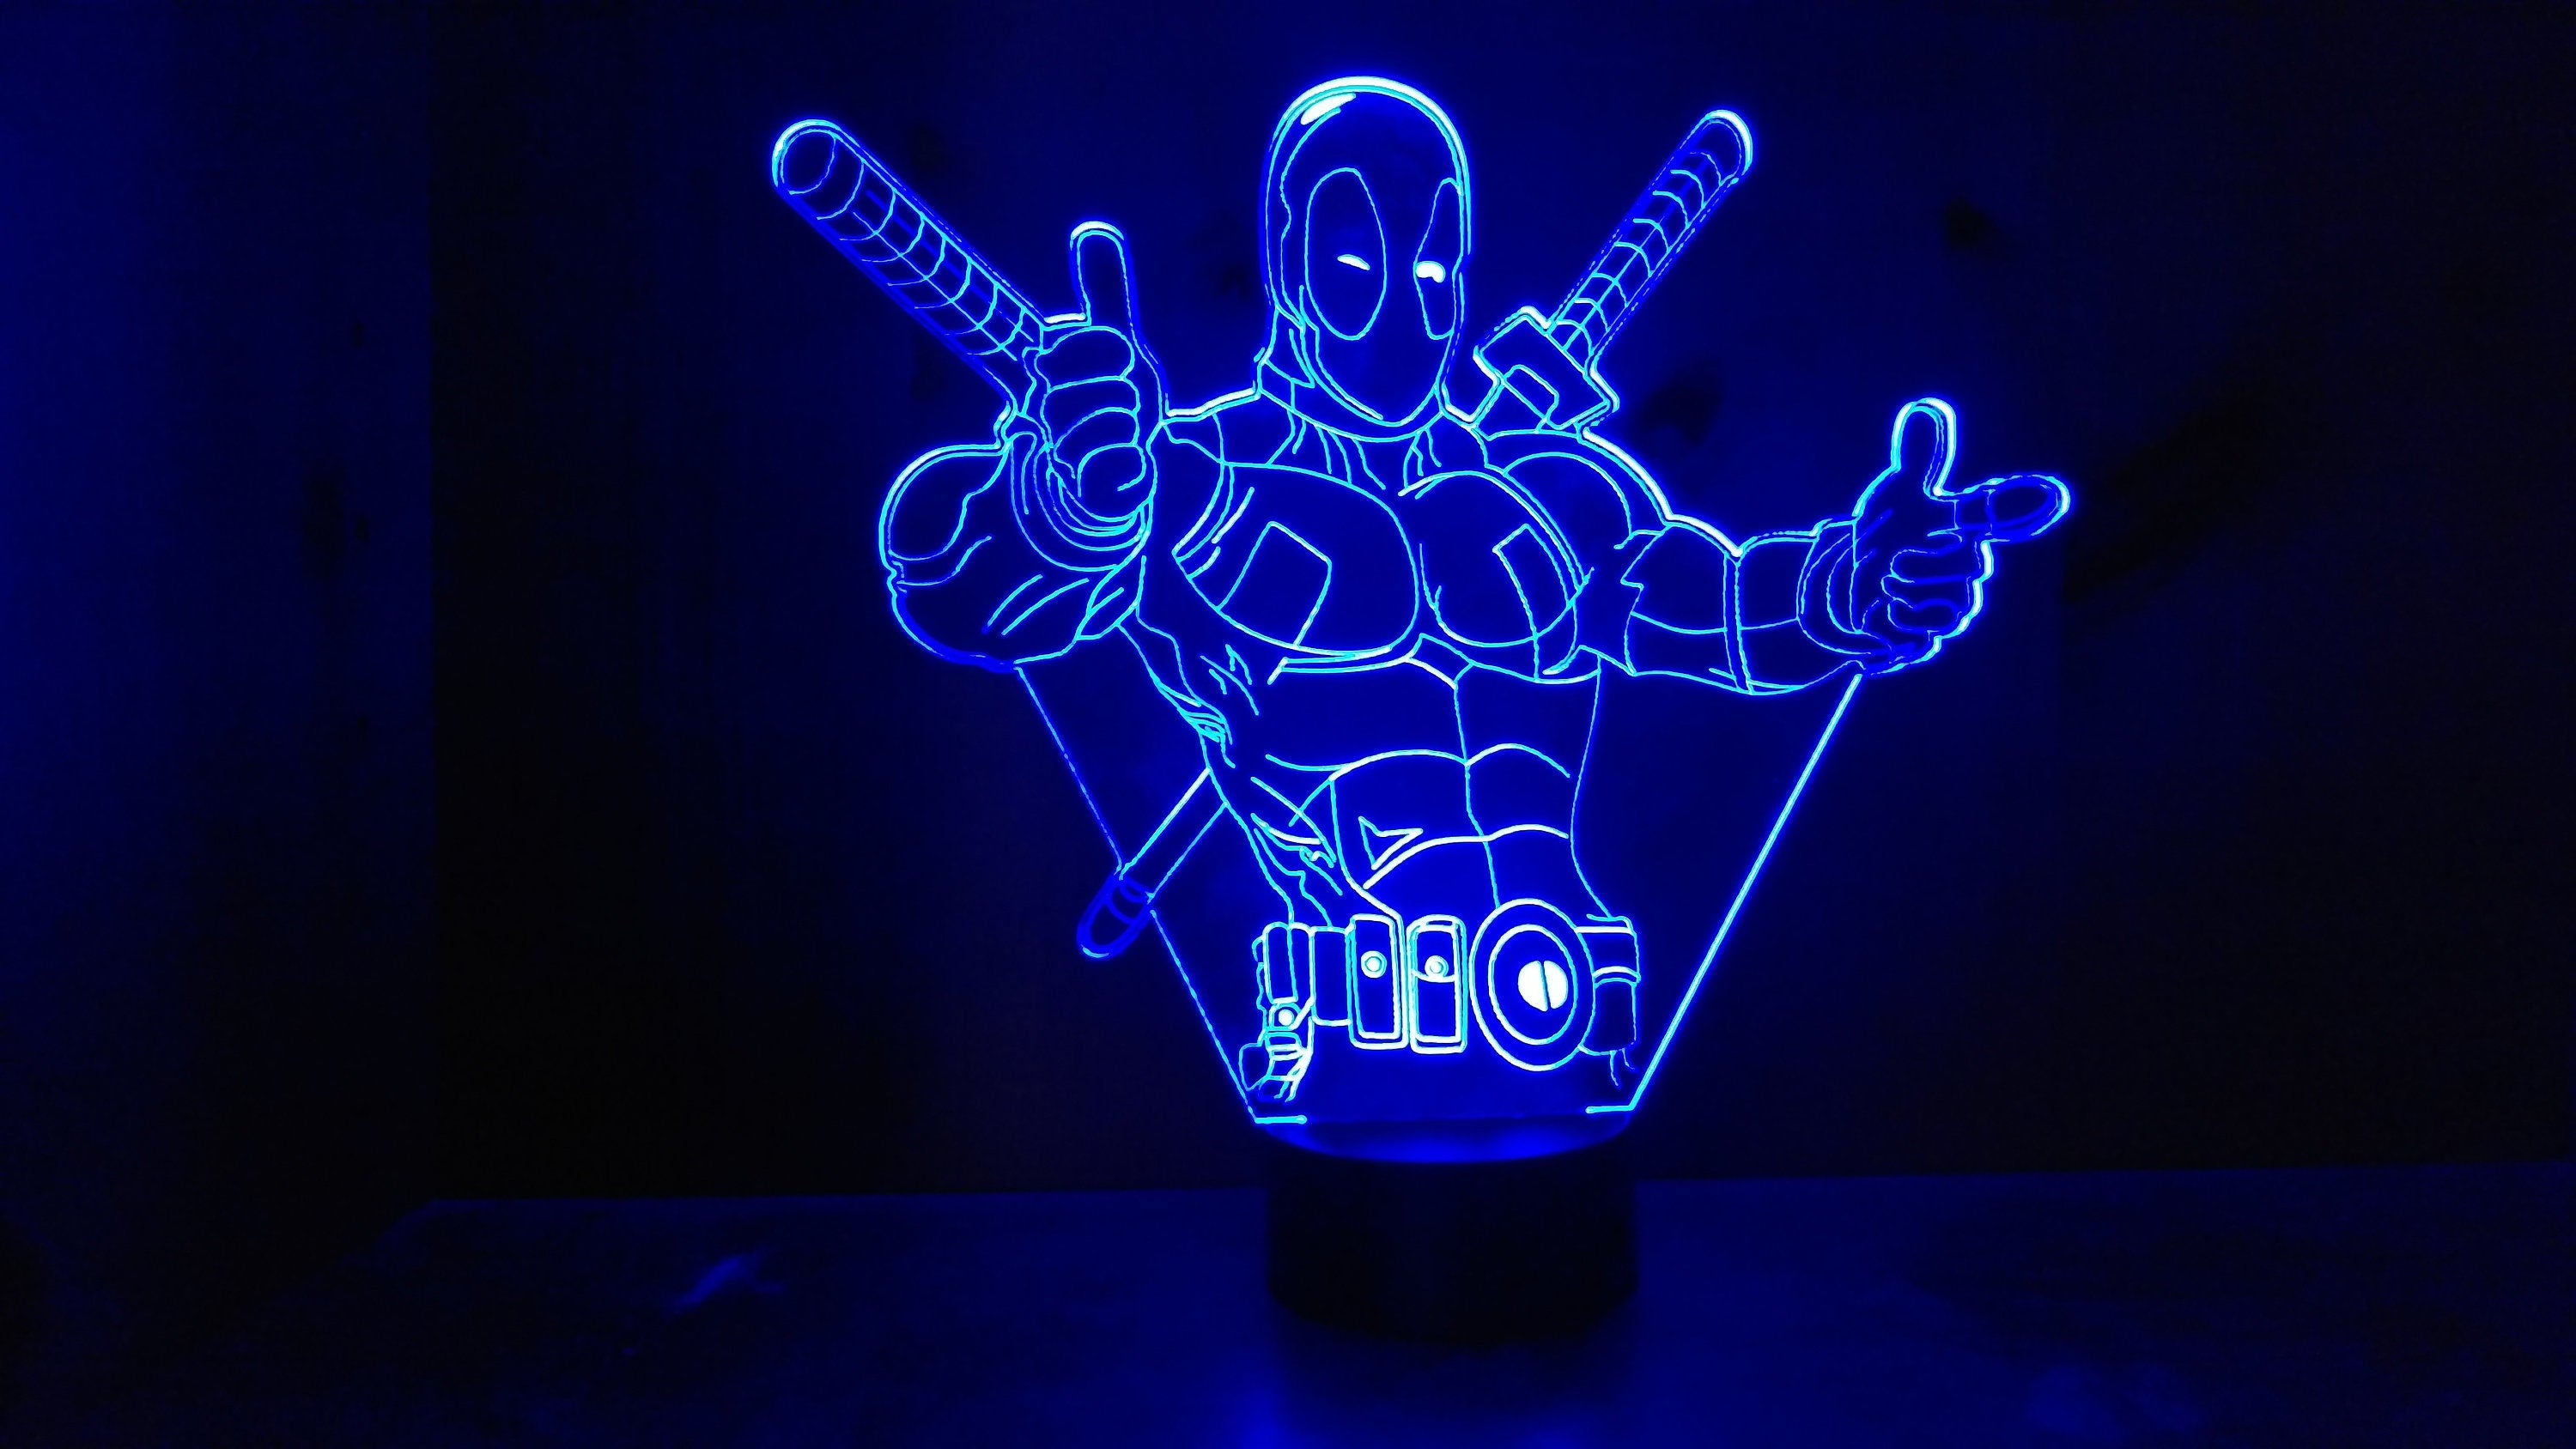 Awesome Deadpool 3D lamp (2177) - FREE SHIPPING!